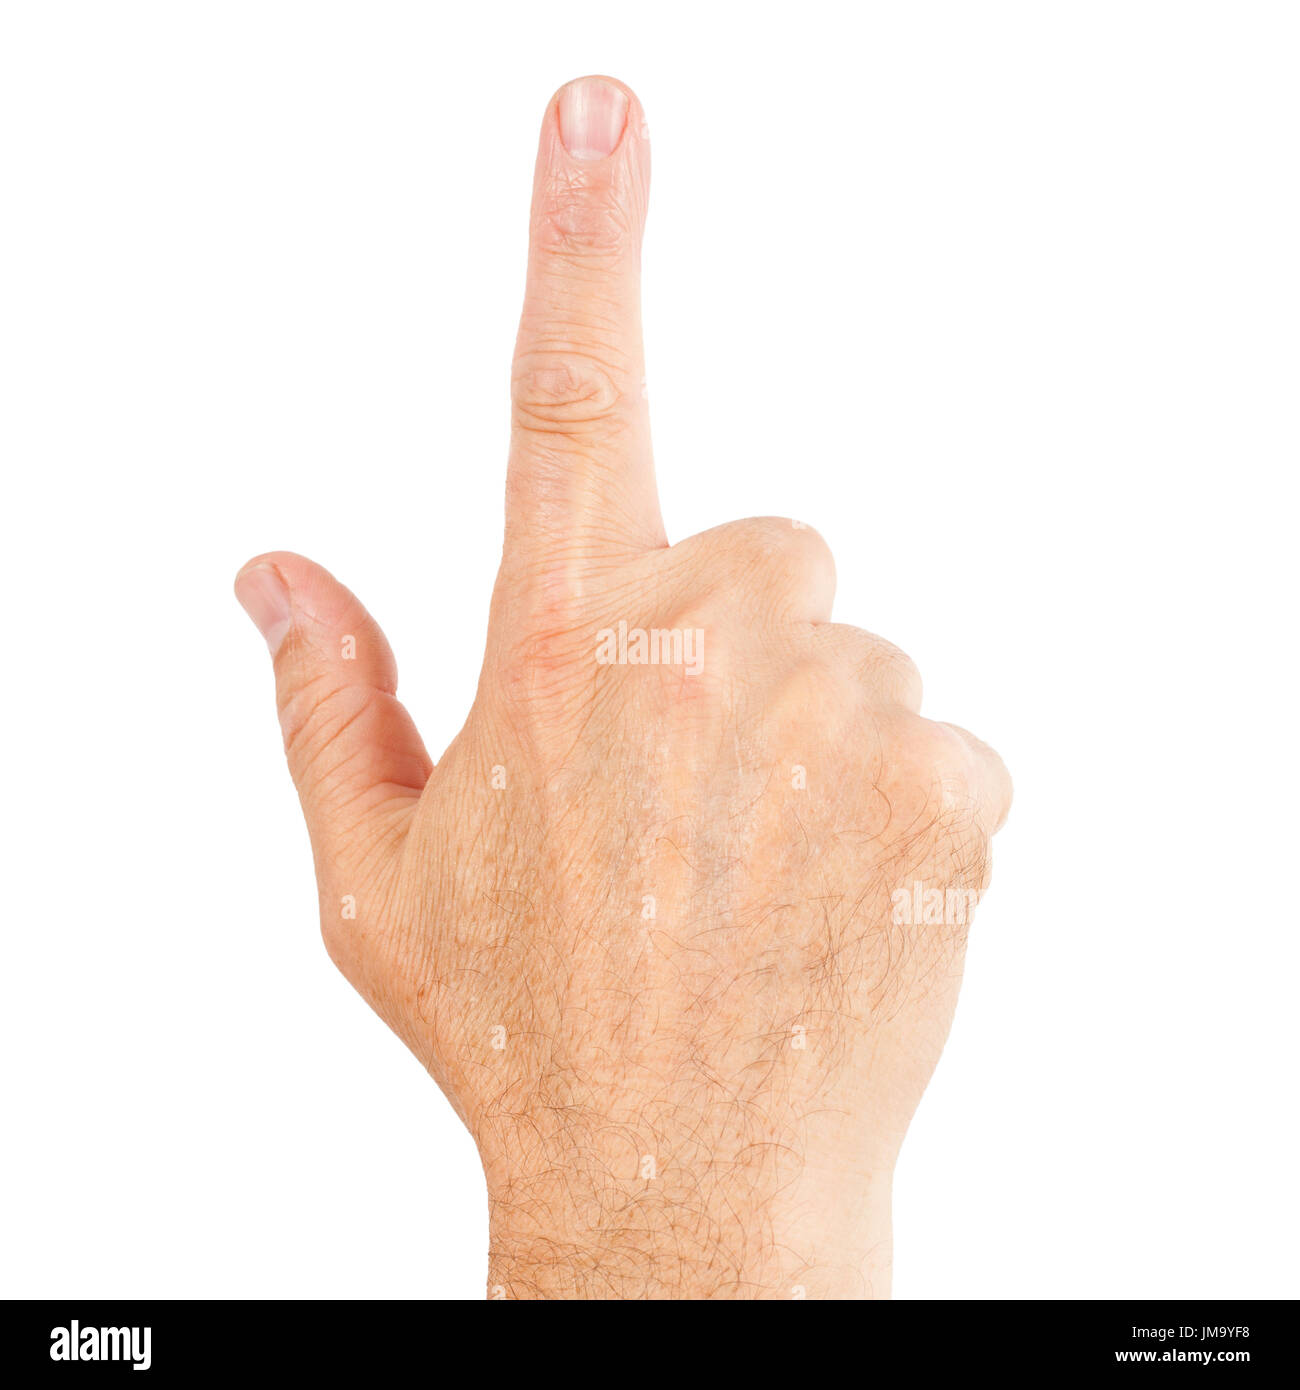 Human hand with finger pointing upwards or forward isolated on white. Stock Photo